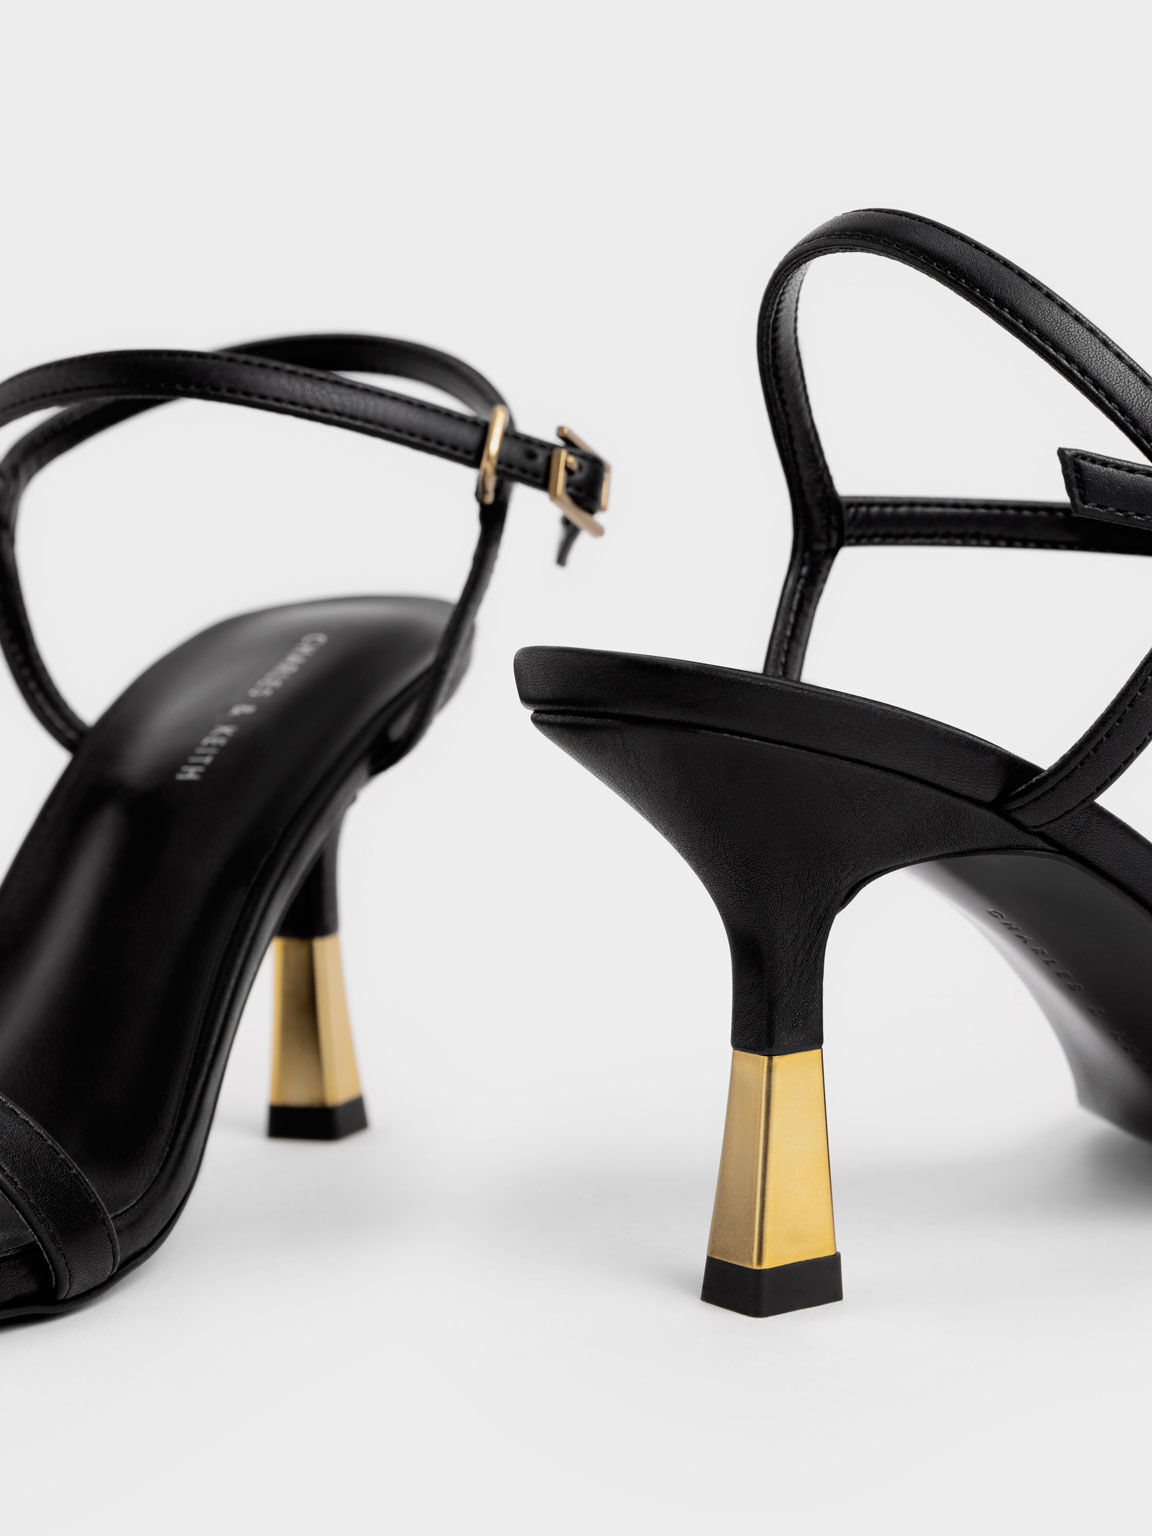 Charles & Keith Black Ankle Strap Sandals